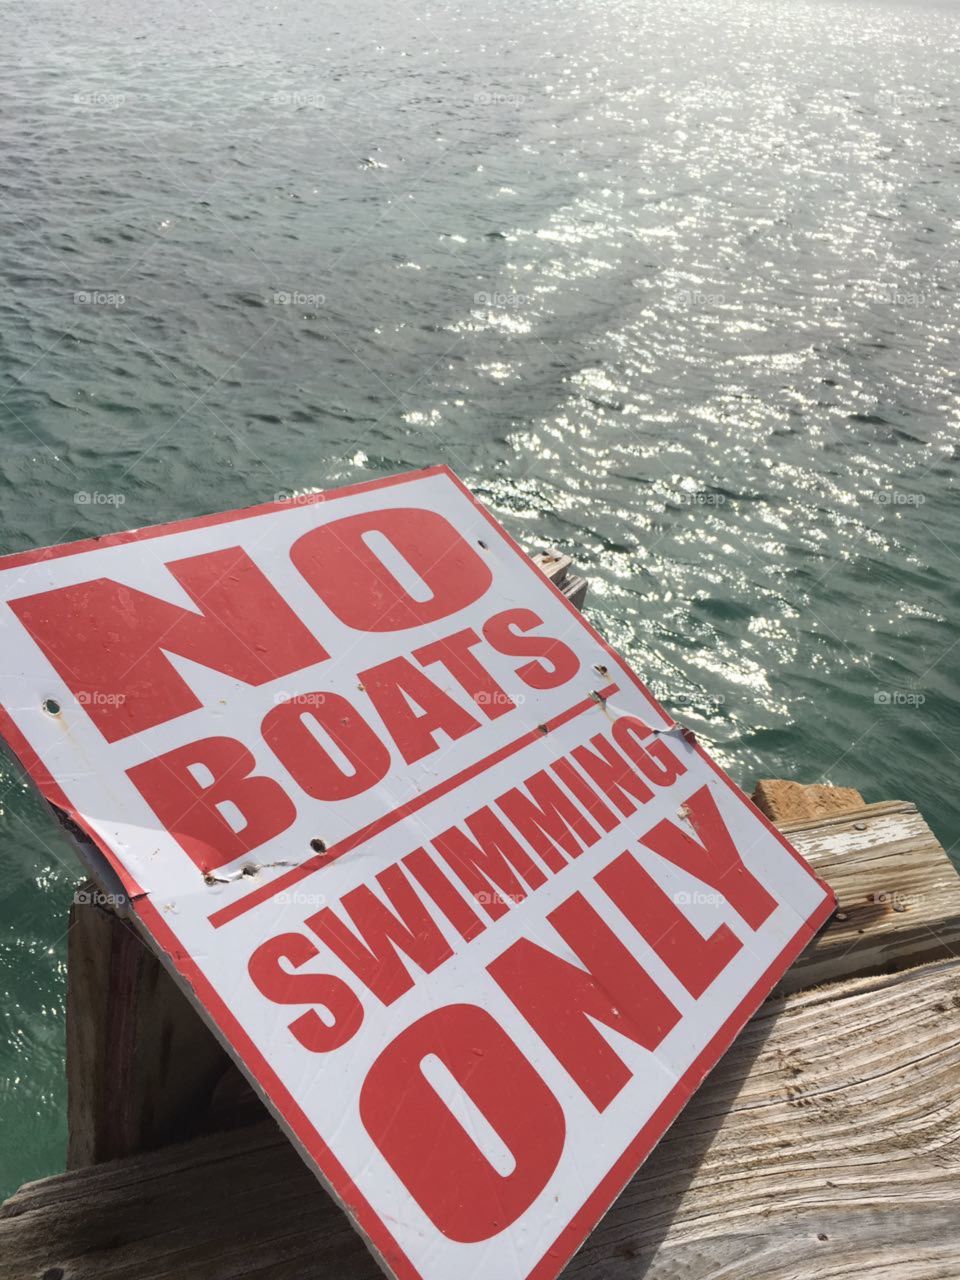 No boats, swimming only.